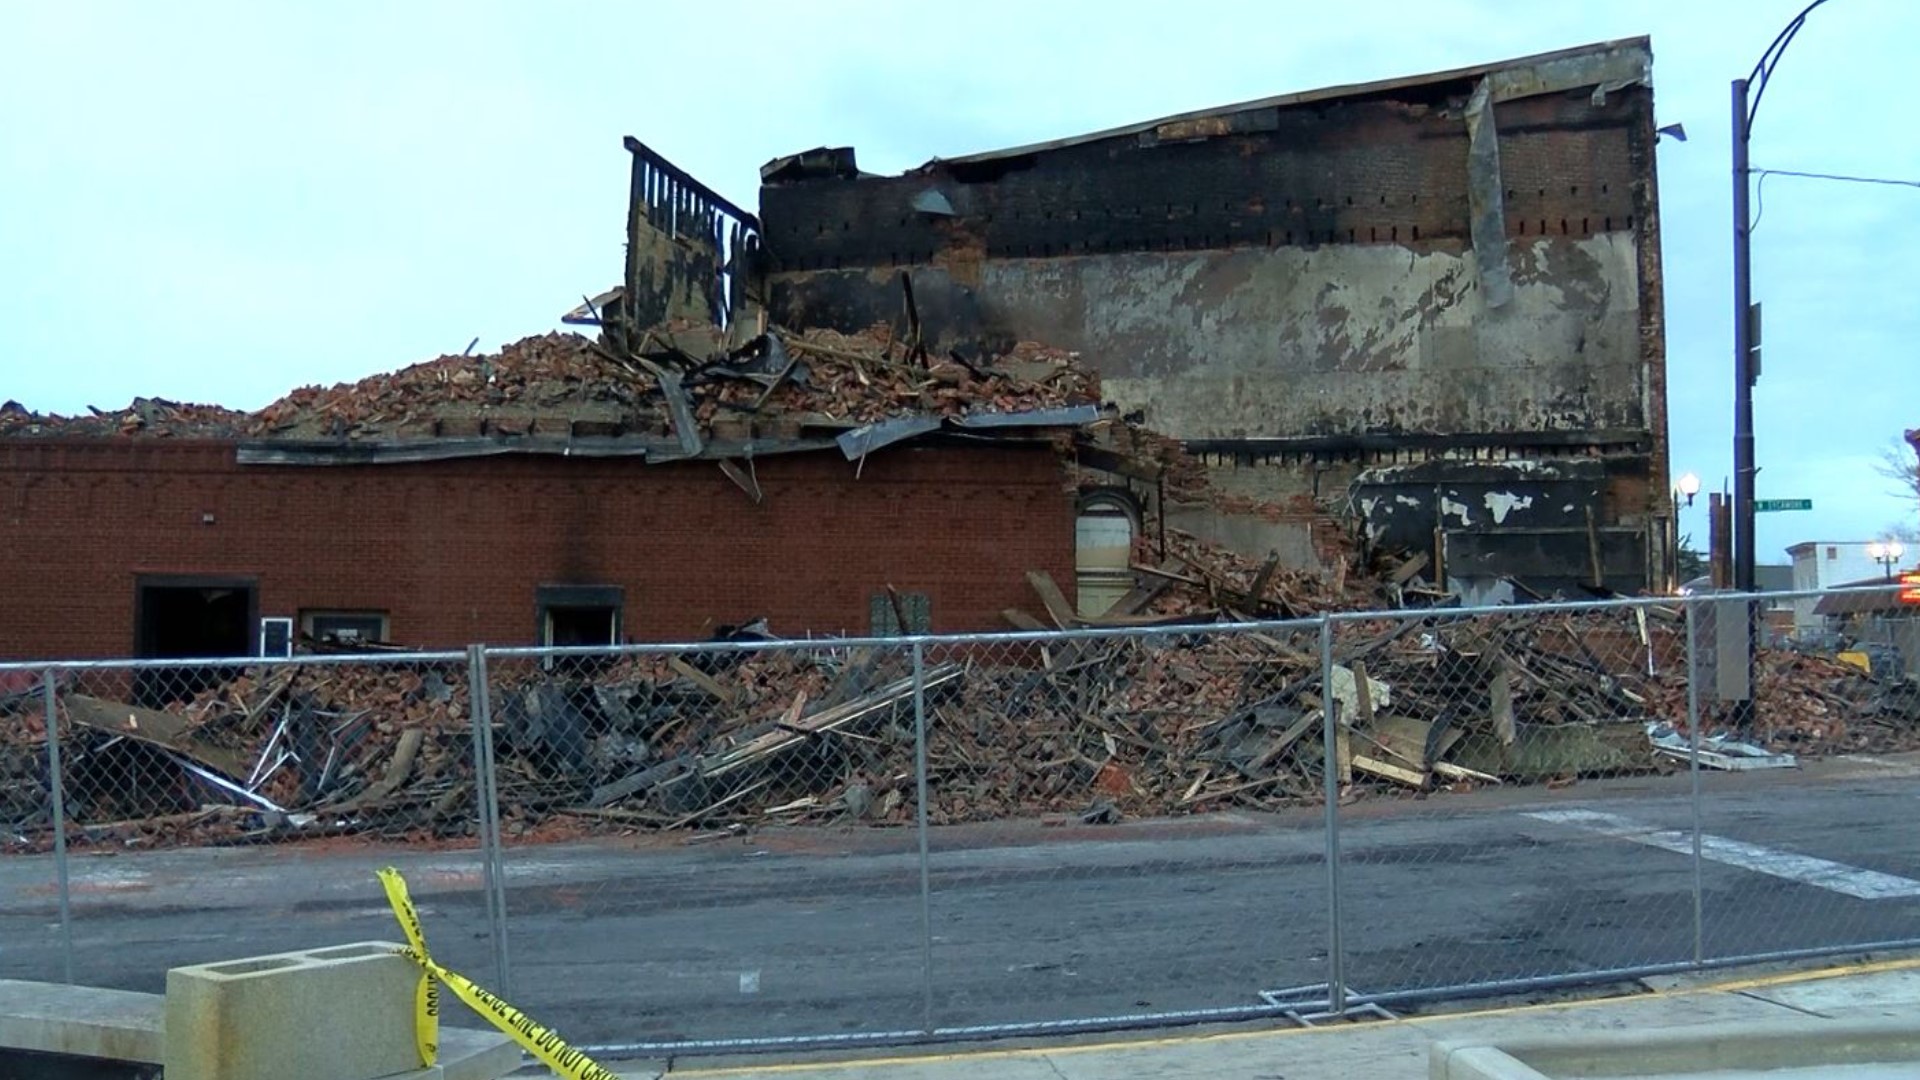 The community has raised thousands of dollars to help the four businesses affected by a fire.